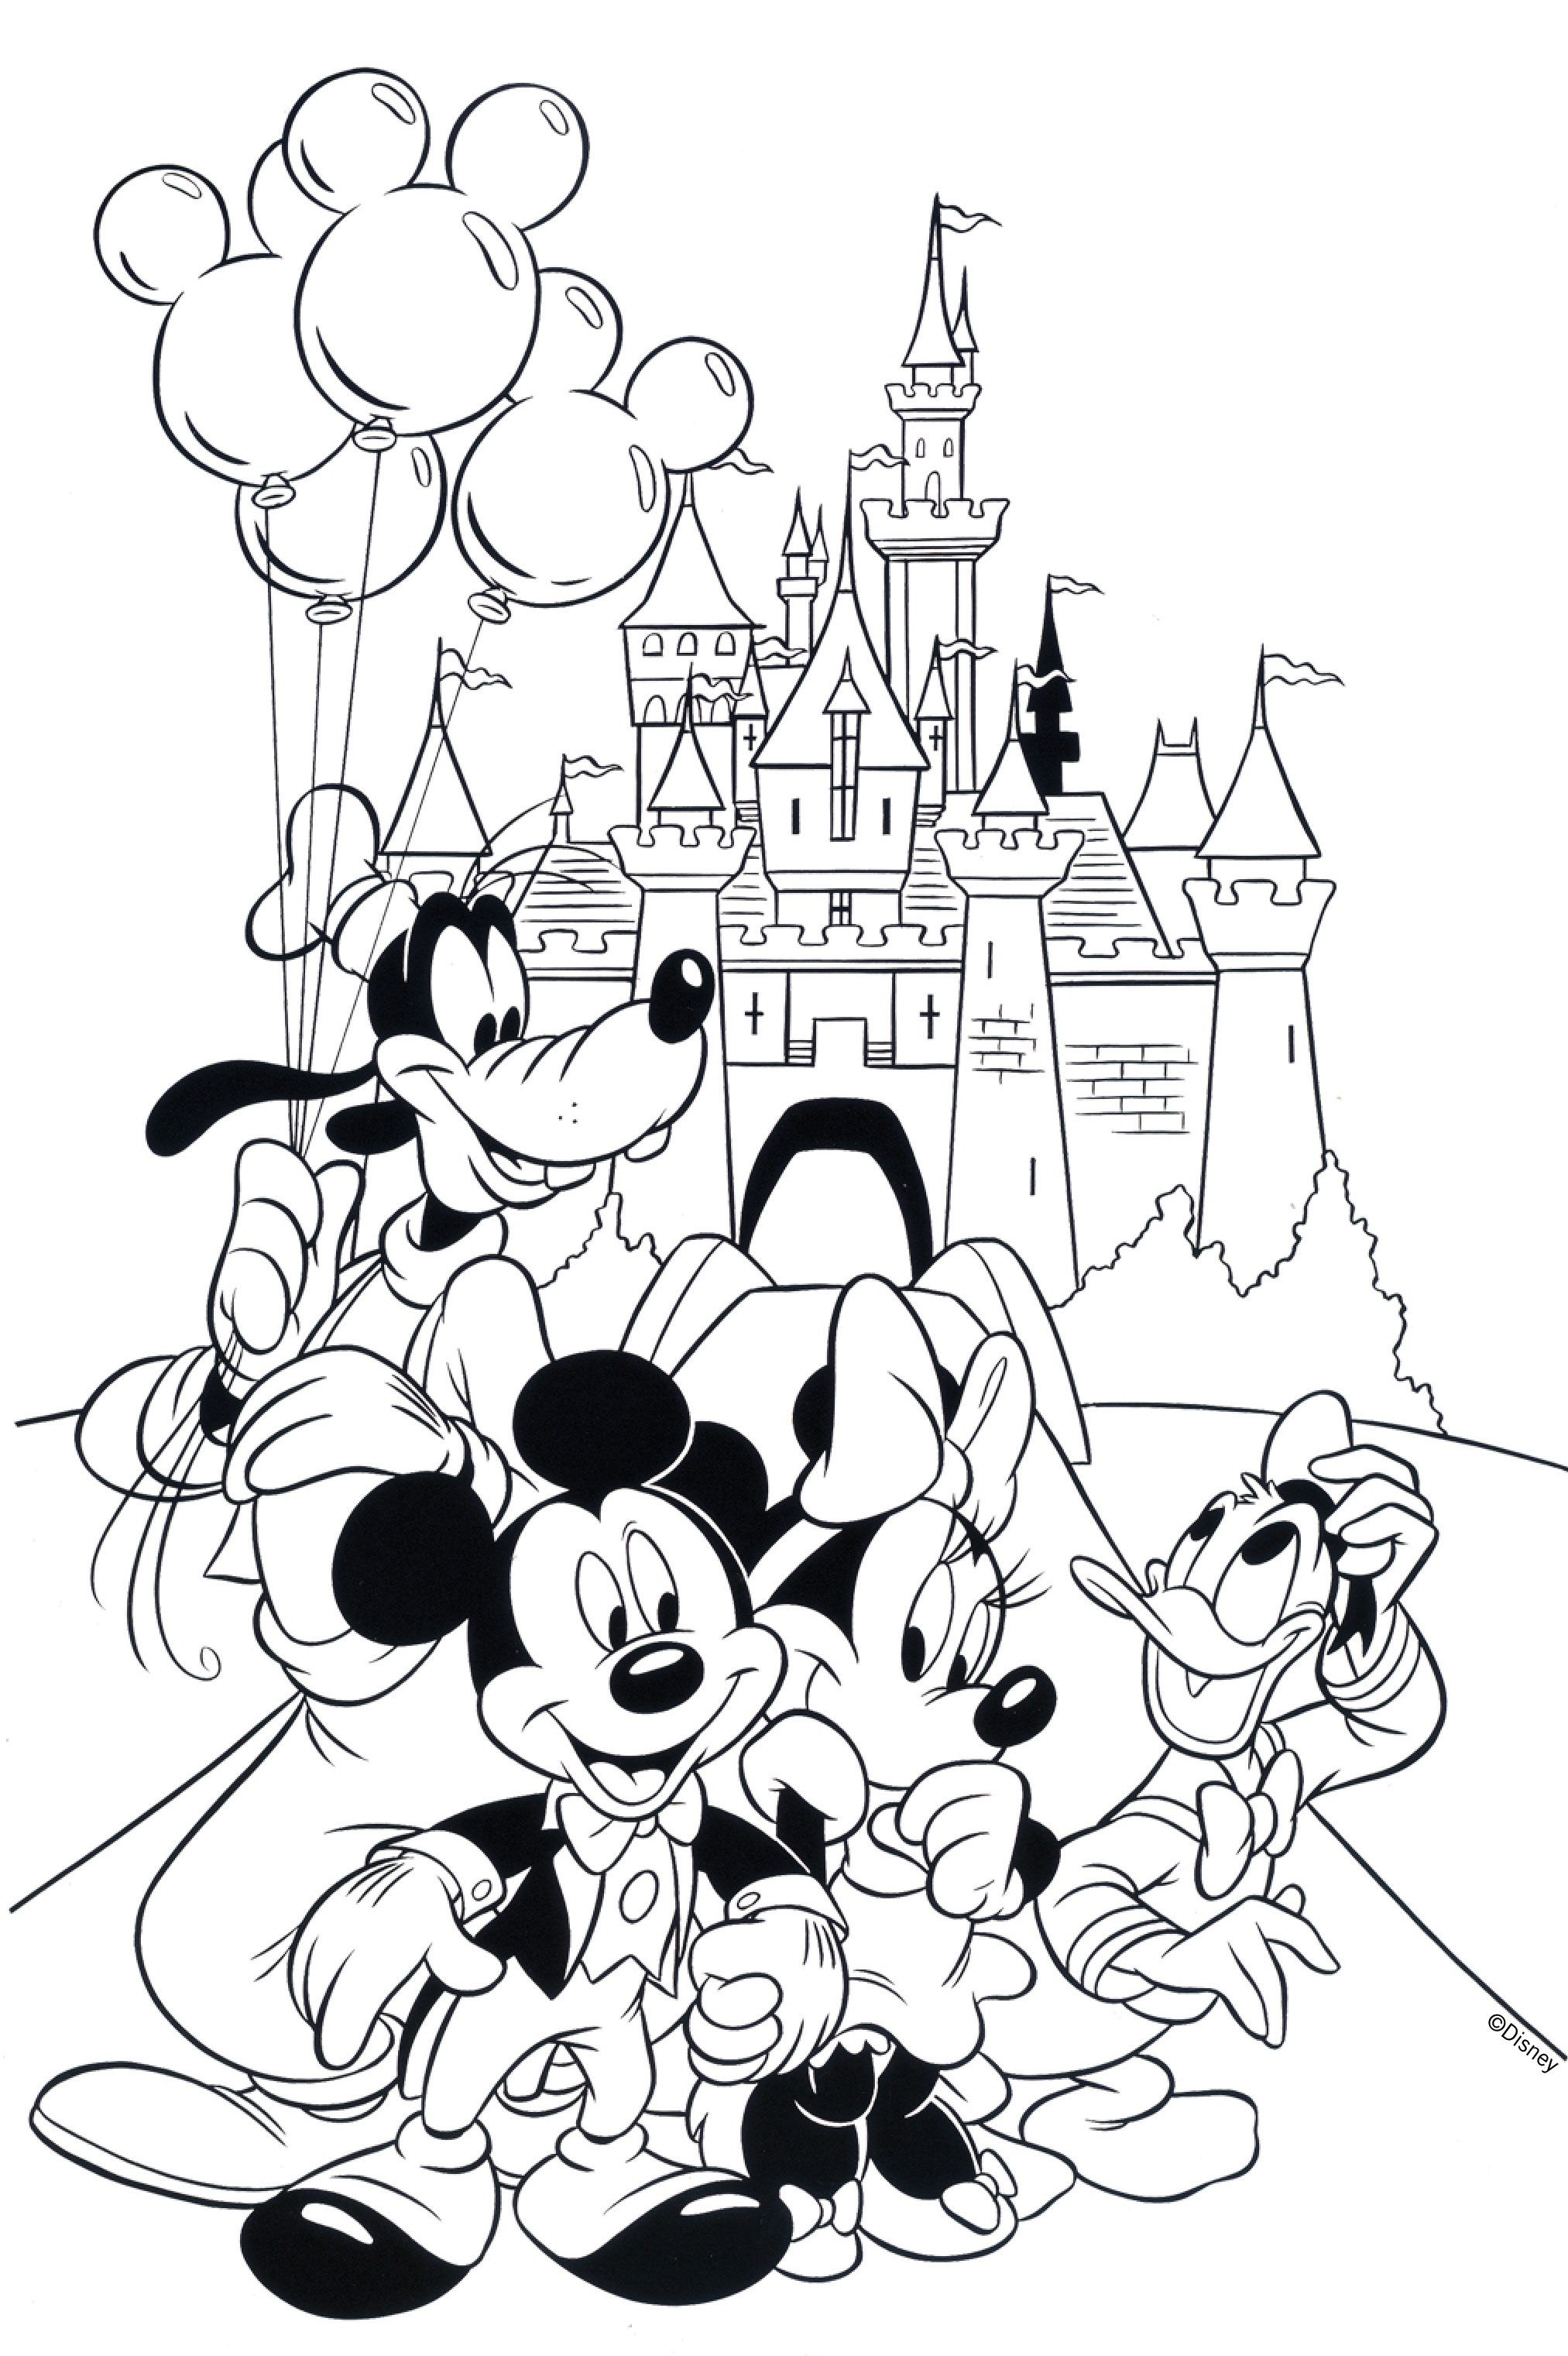 Free Disney Coloring Pages | Coloring Books | Coloring Pages, Free - Free Printable Disney Coloring Pages